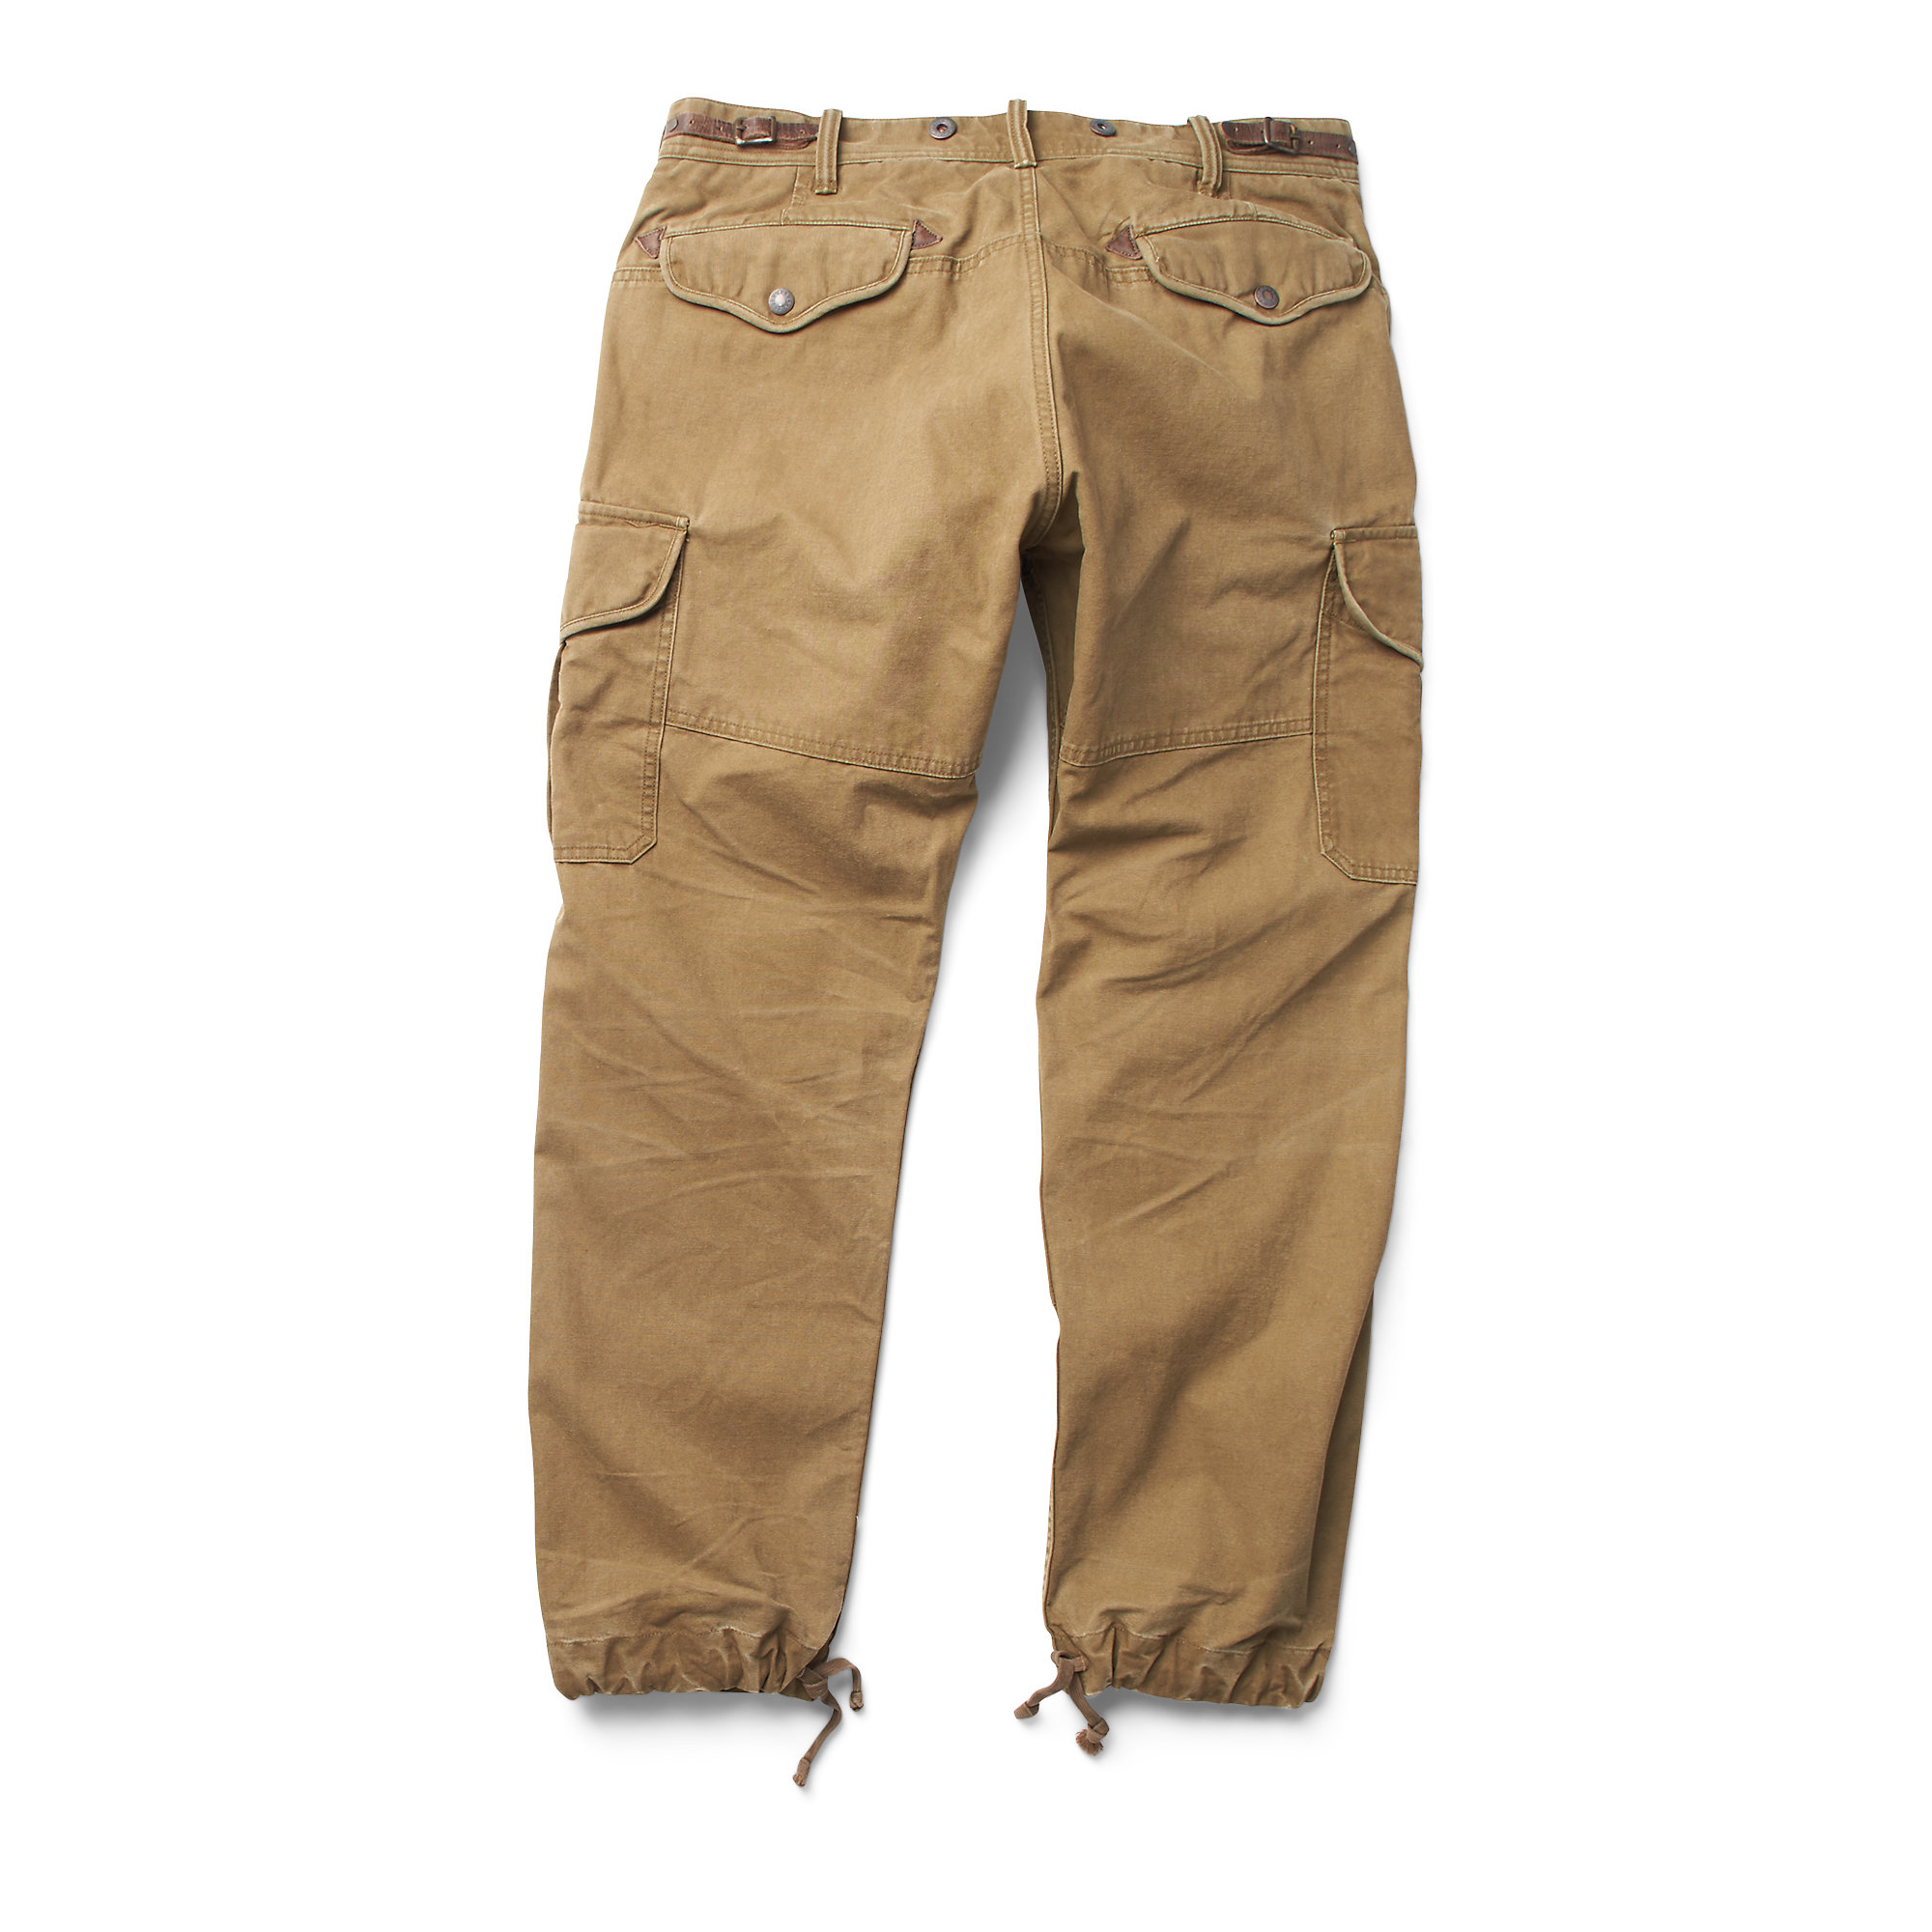 Lyst - RRL Cotton Canvas Cargo Pant in Brown for Men